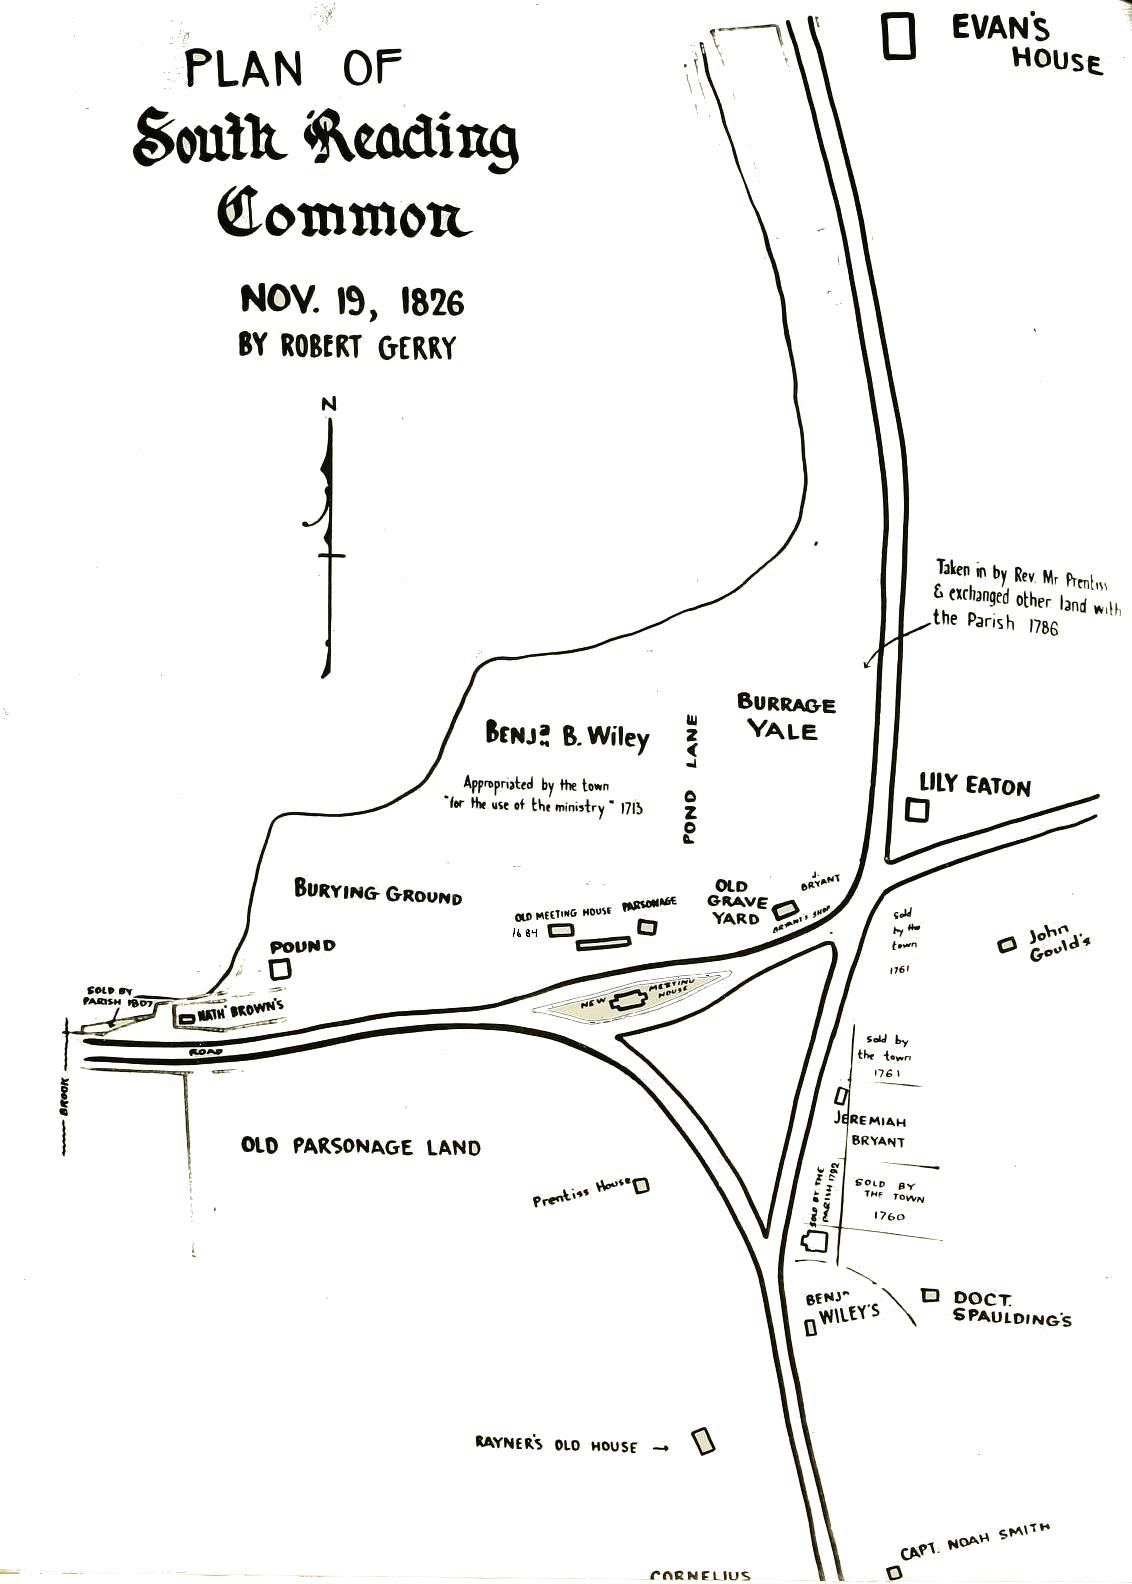 Plan of South Reading Common in 1826